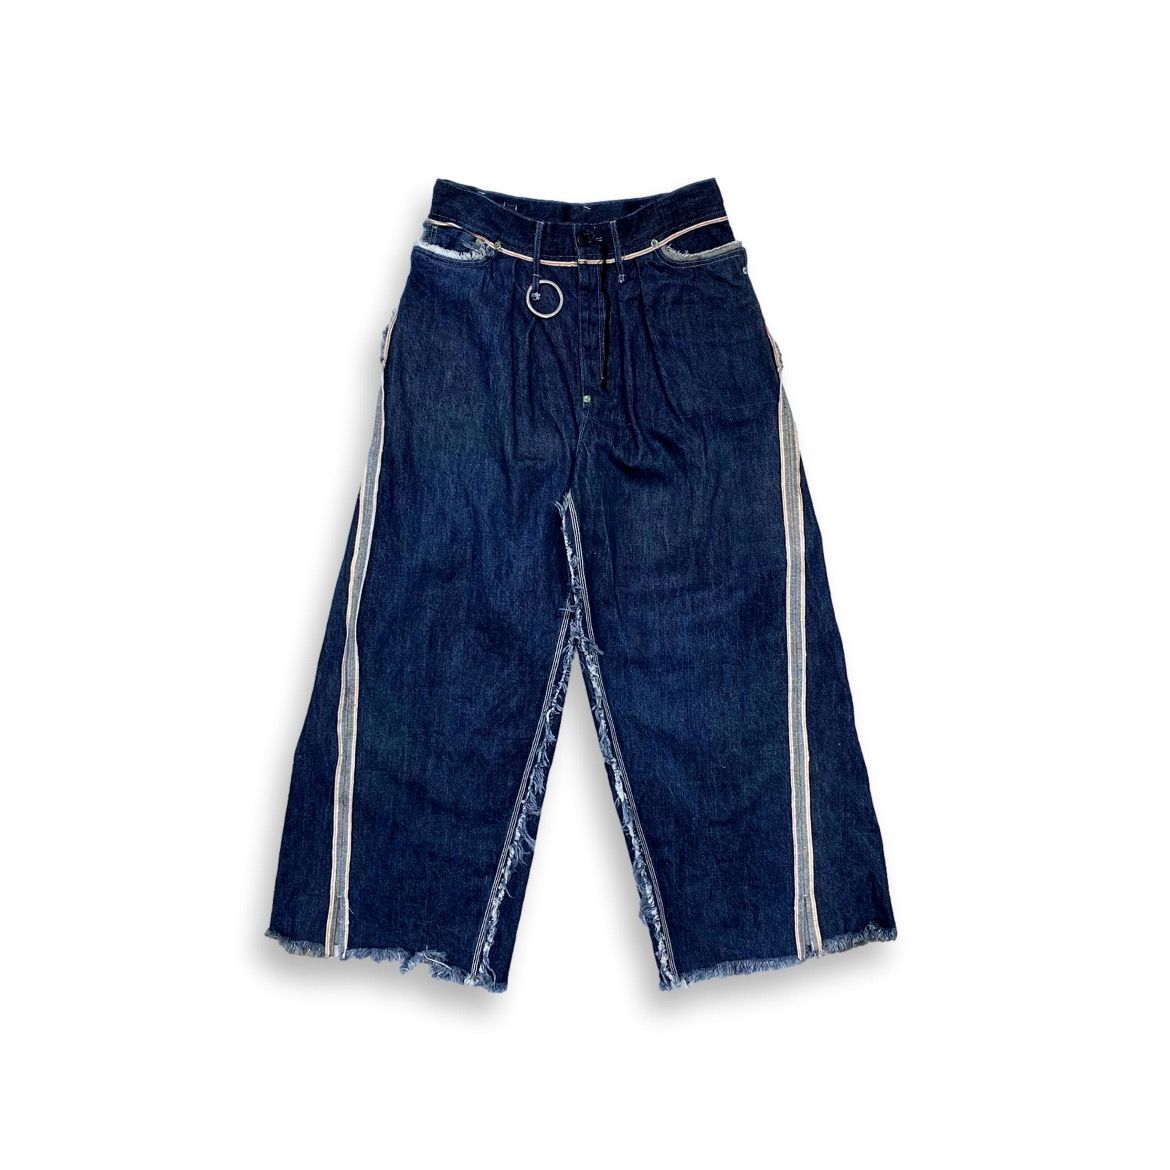 MINUS - 【残りわずか】Slash Seam Inside-Out Twisted Jeans(70's 